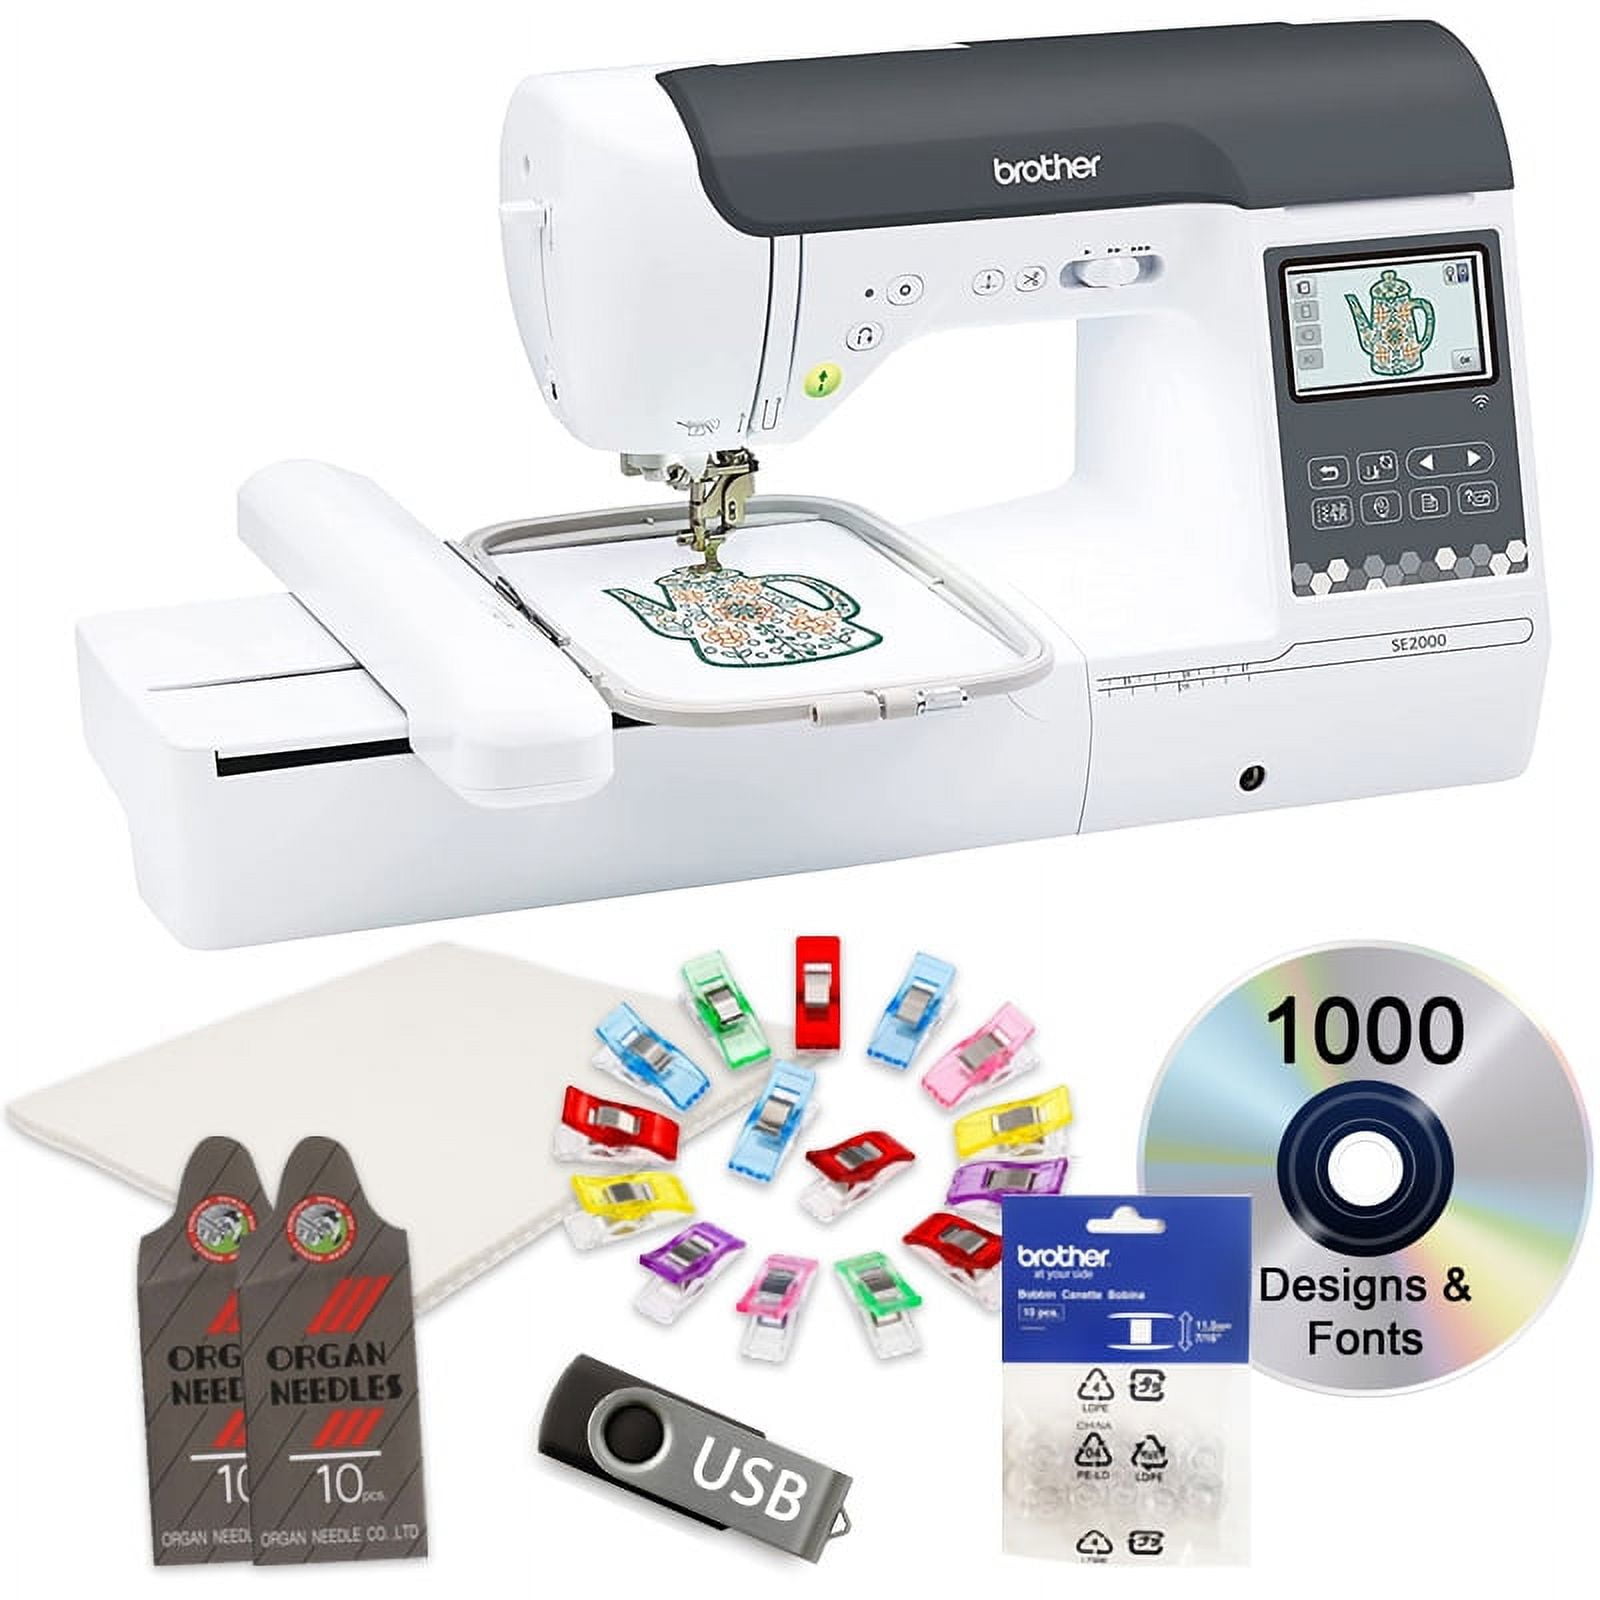 Brother SE2000 Computerized Sewing and Embroidery Machine, 5 x 7 Hoop  Area, LCD Touchscreen + $199 Bonus Bundle